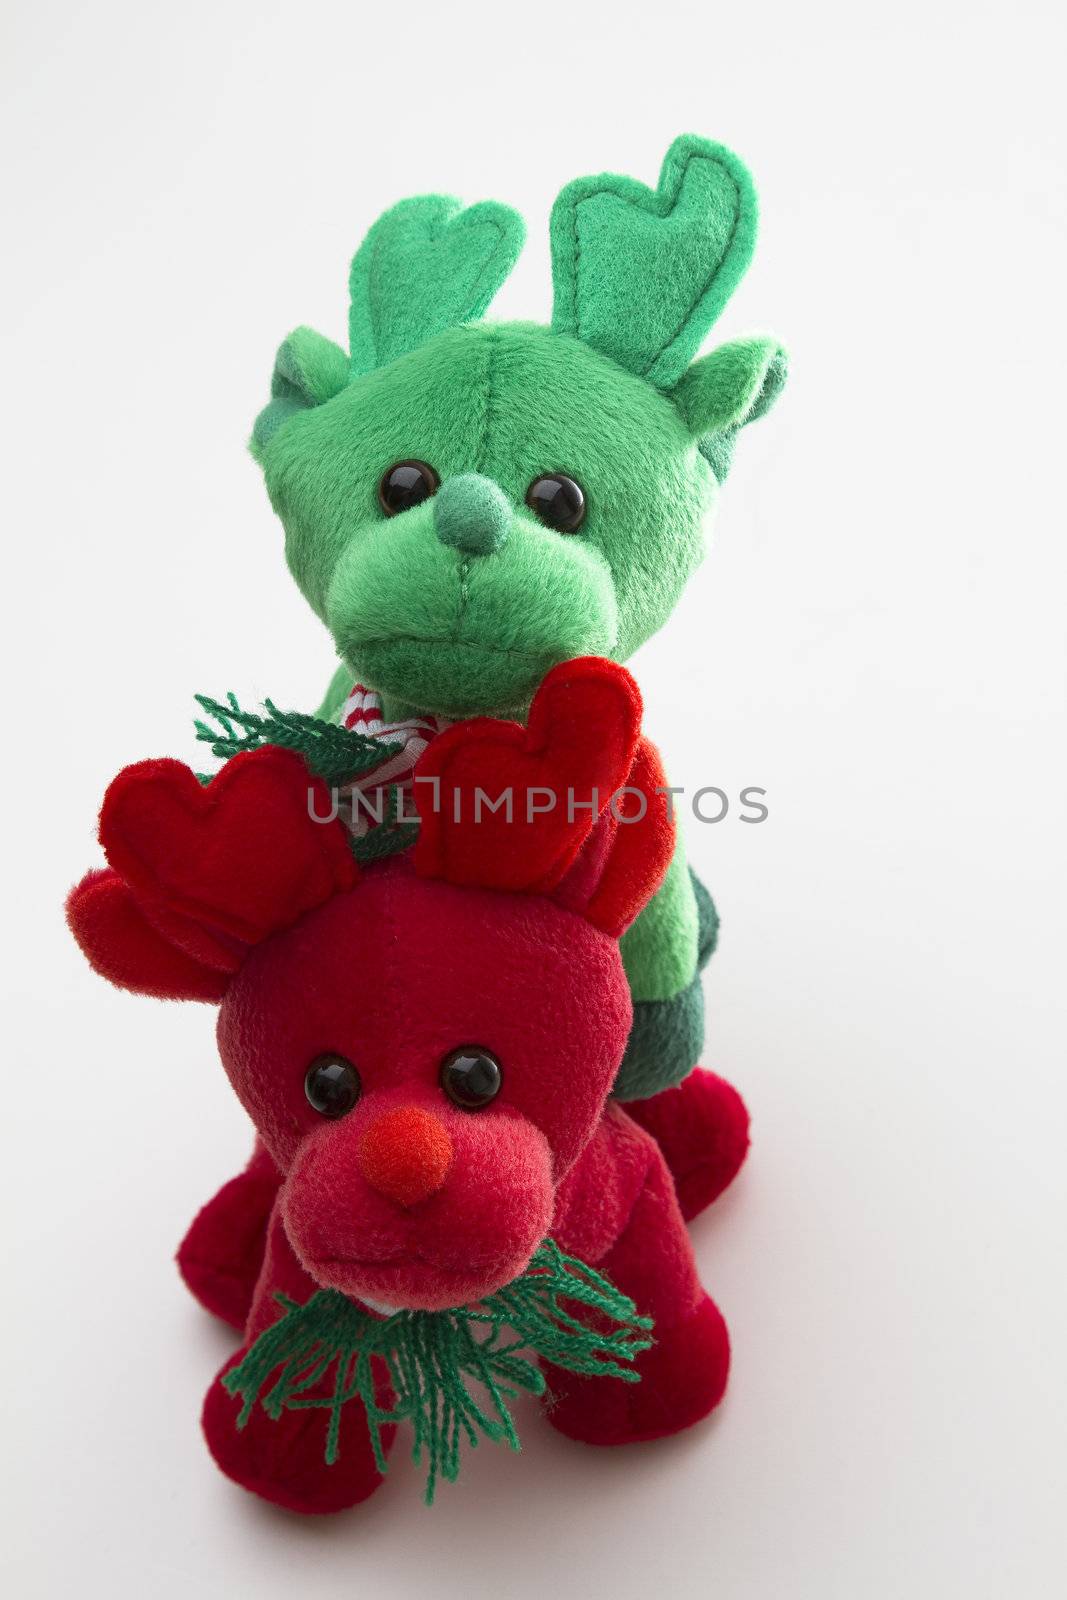 red and green toy reindeer standing one on top of the other